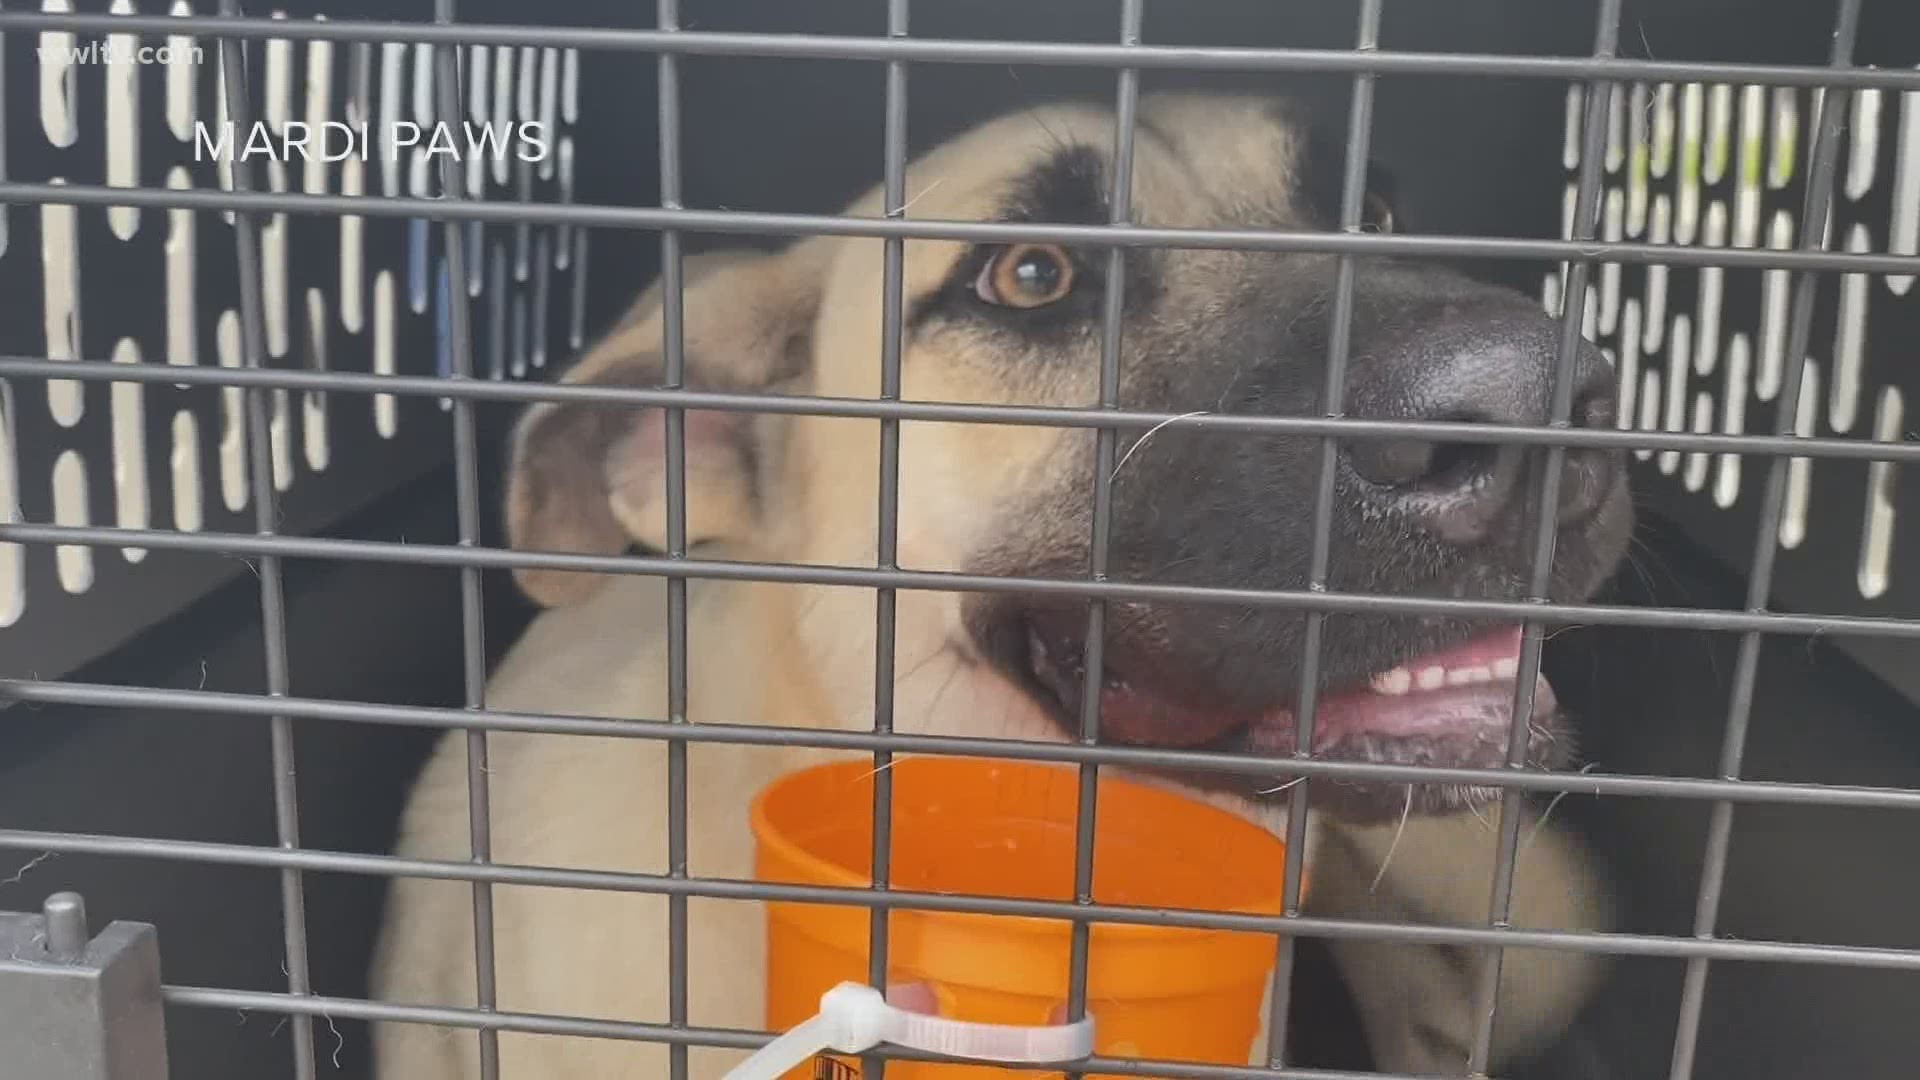 100 at-risk animals flown from Louisiana to East Coast shelters for adoption